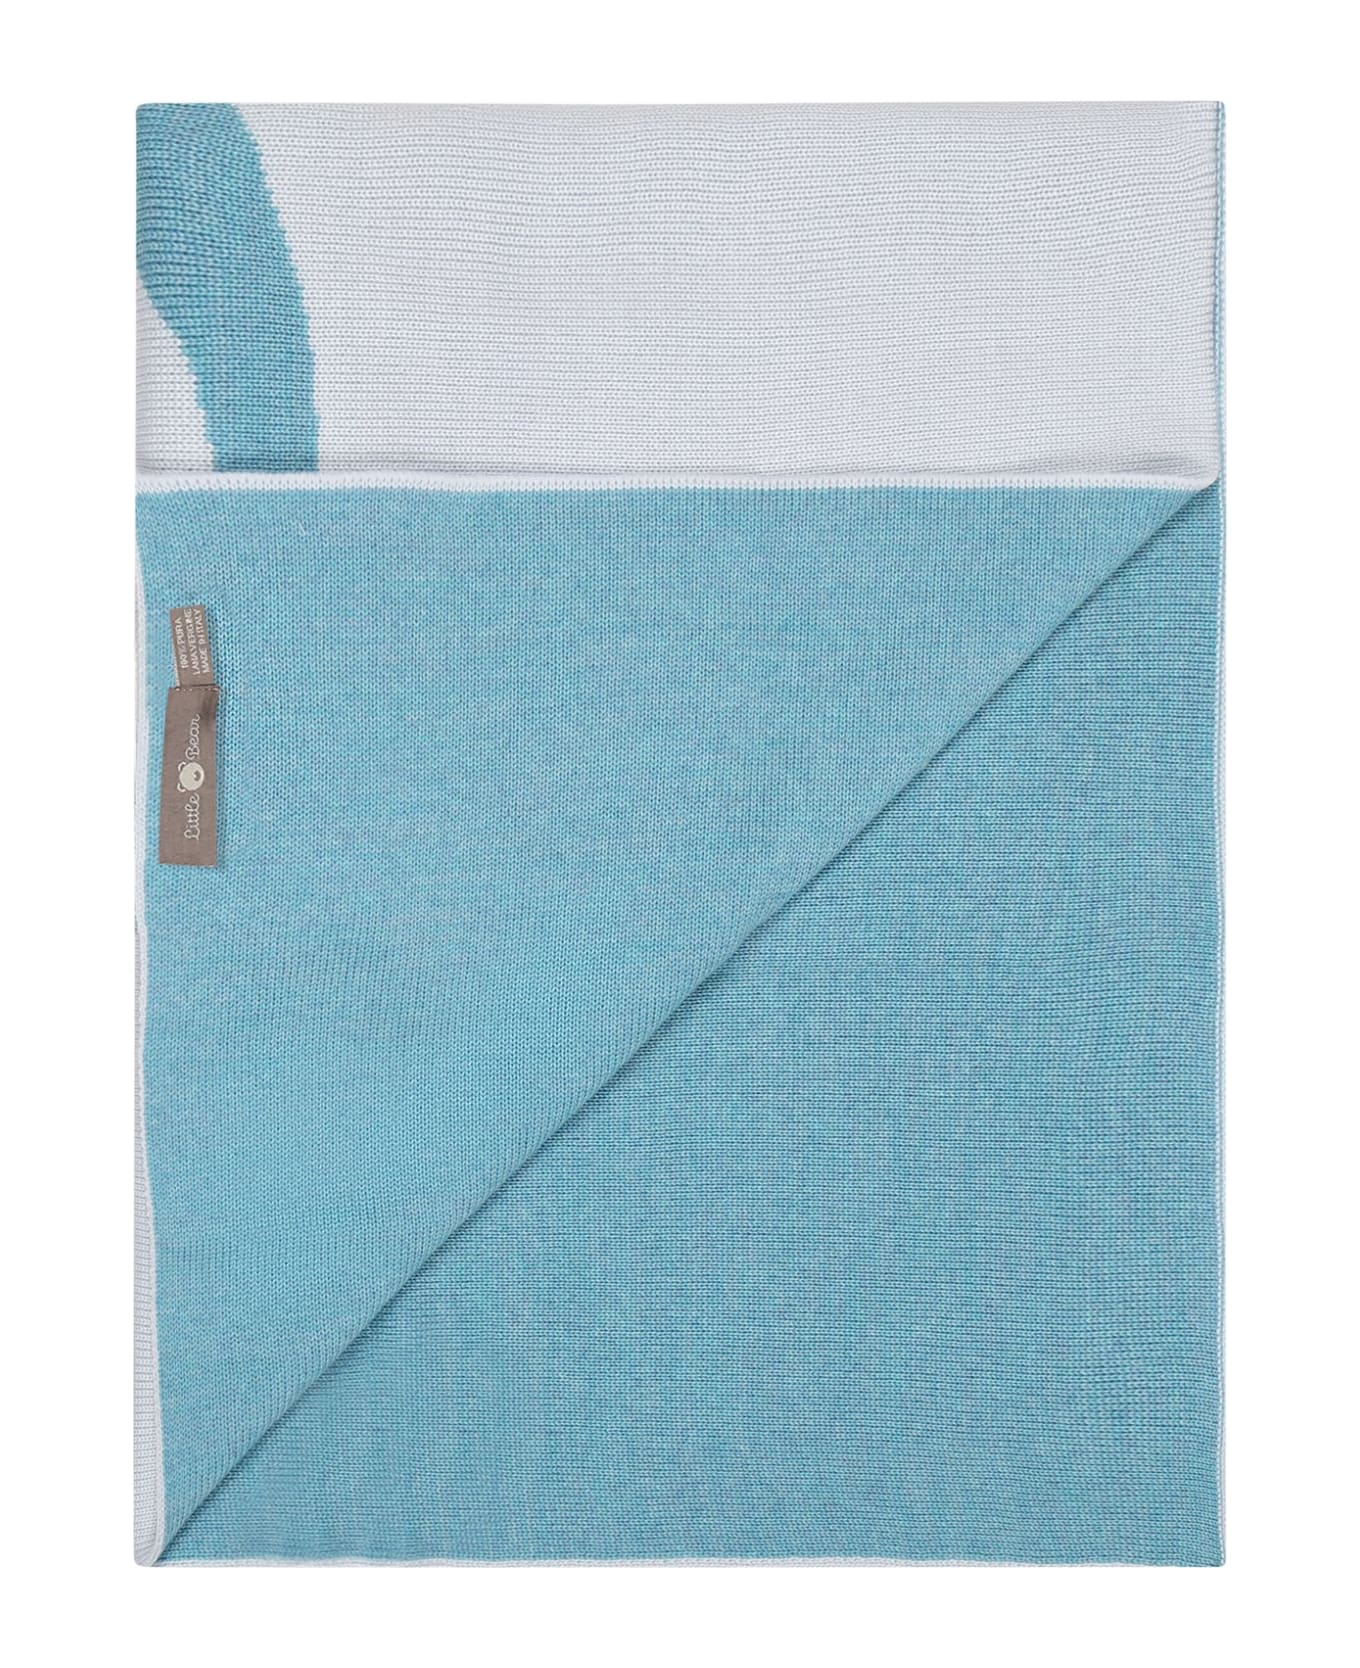 Little Bear Light Blue Blanket For Baby Boy With Embroidered Light Blue Bear - Multicolor アクセサリー＆ギフト